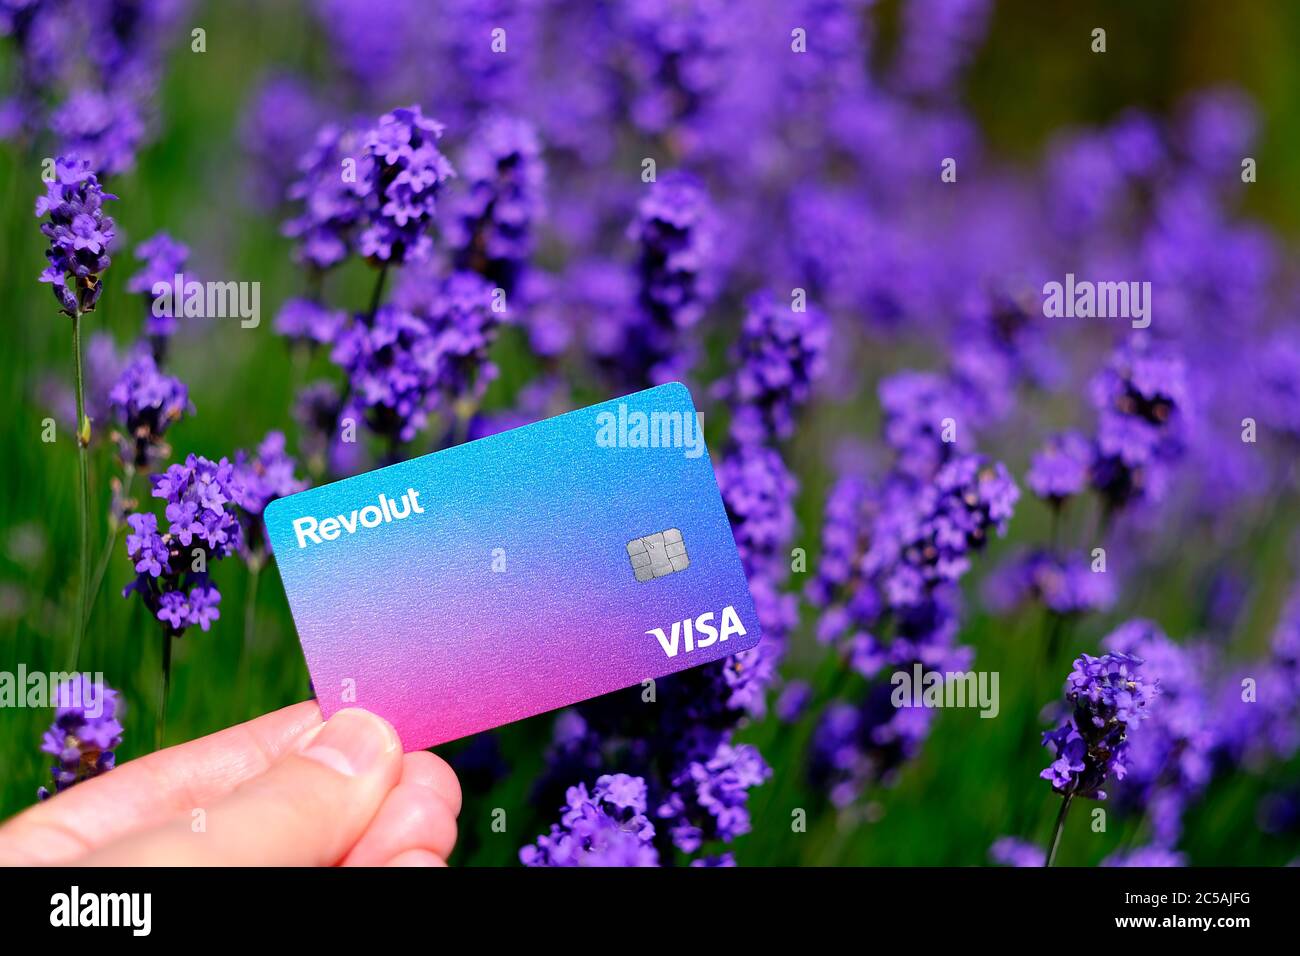 Stone / UK - June 30 2020: New Revolut bank card hold in hand with the lavender flowers at the background. Not a montage, real photo. Stock Photo